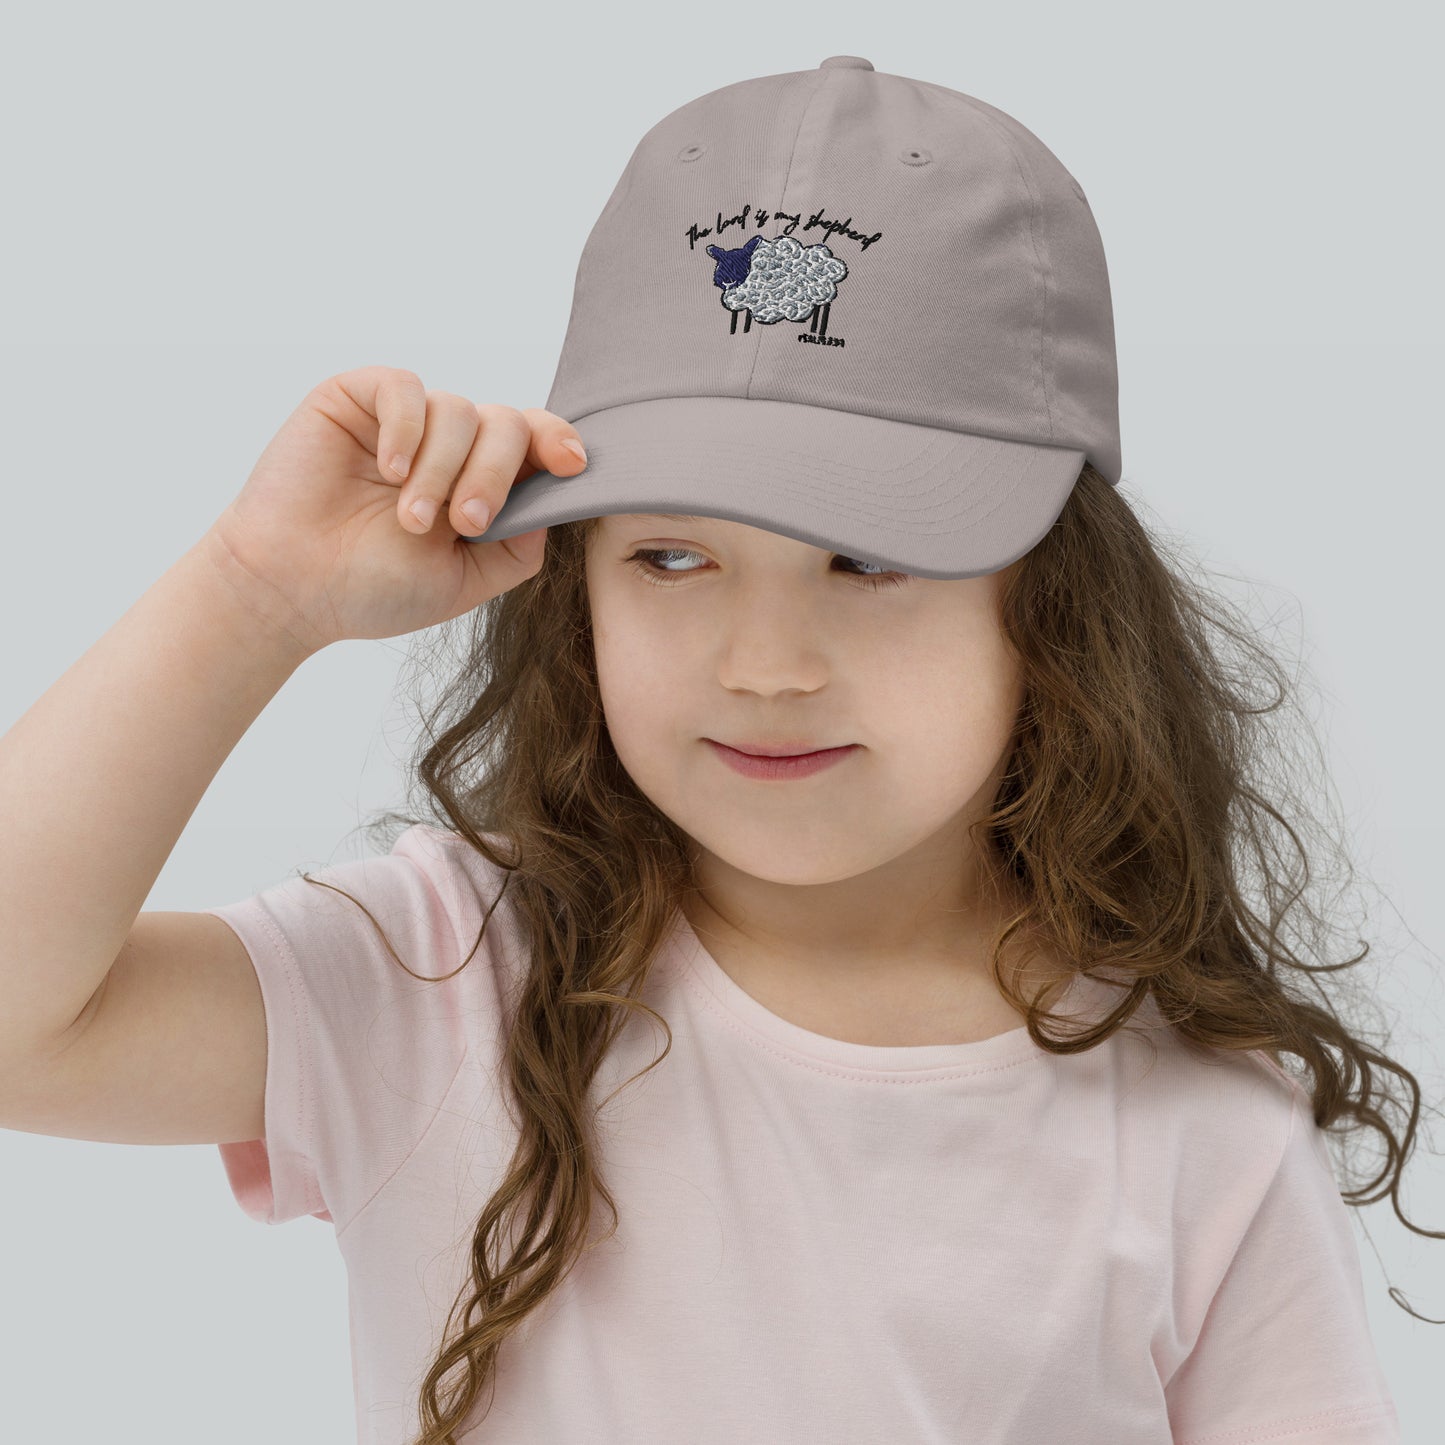 Youth baseball cap - The Lord is My Shepherd Psalms 25:1